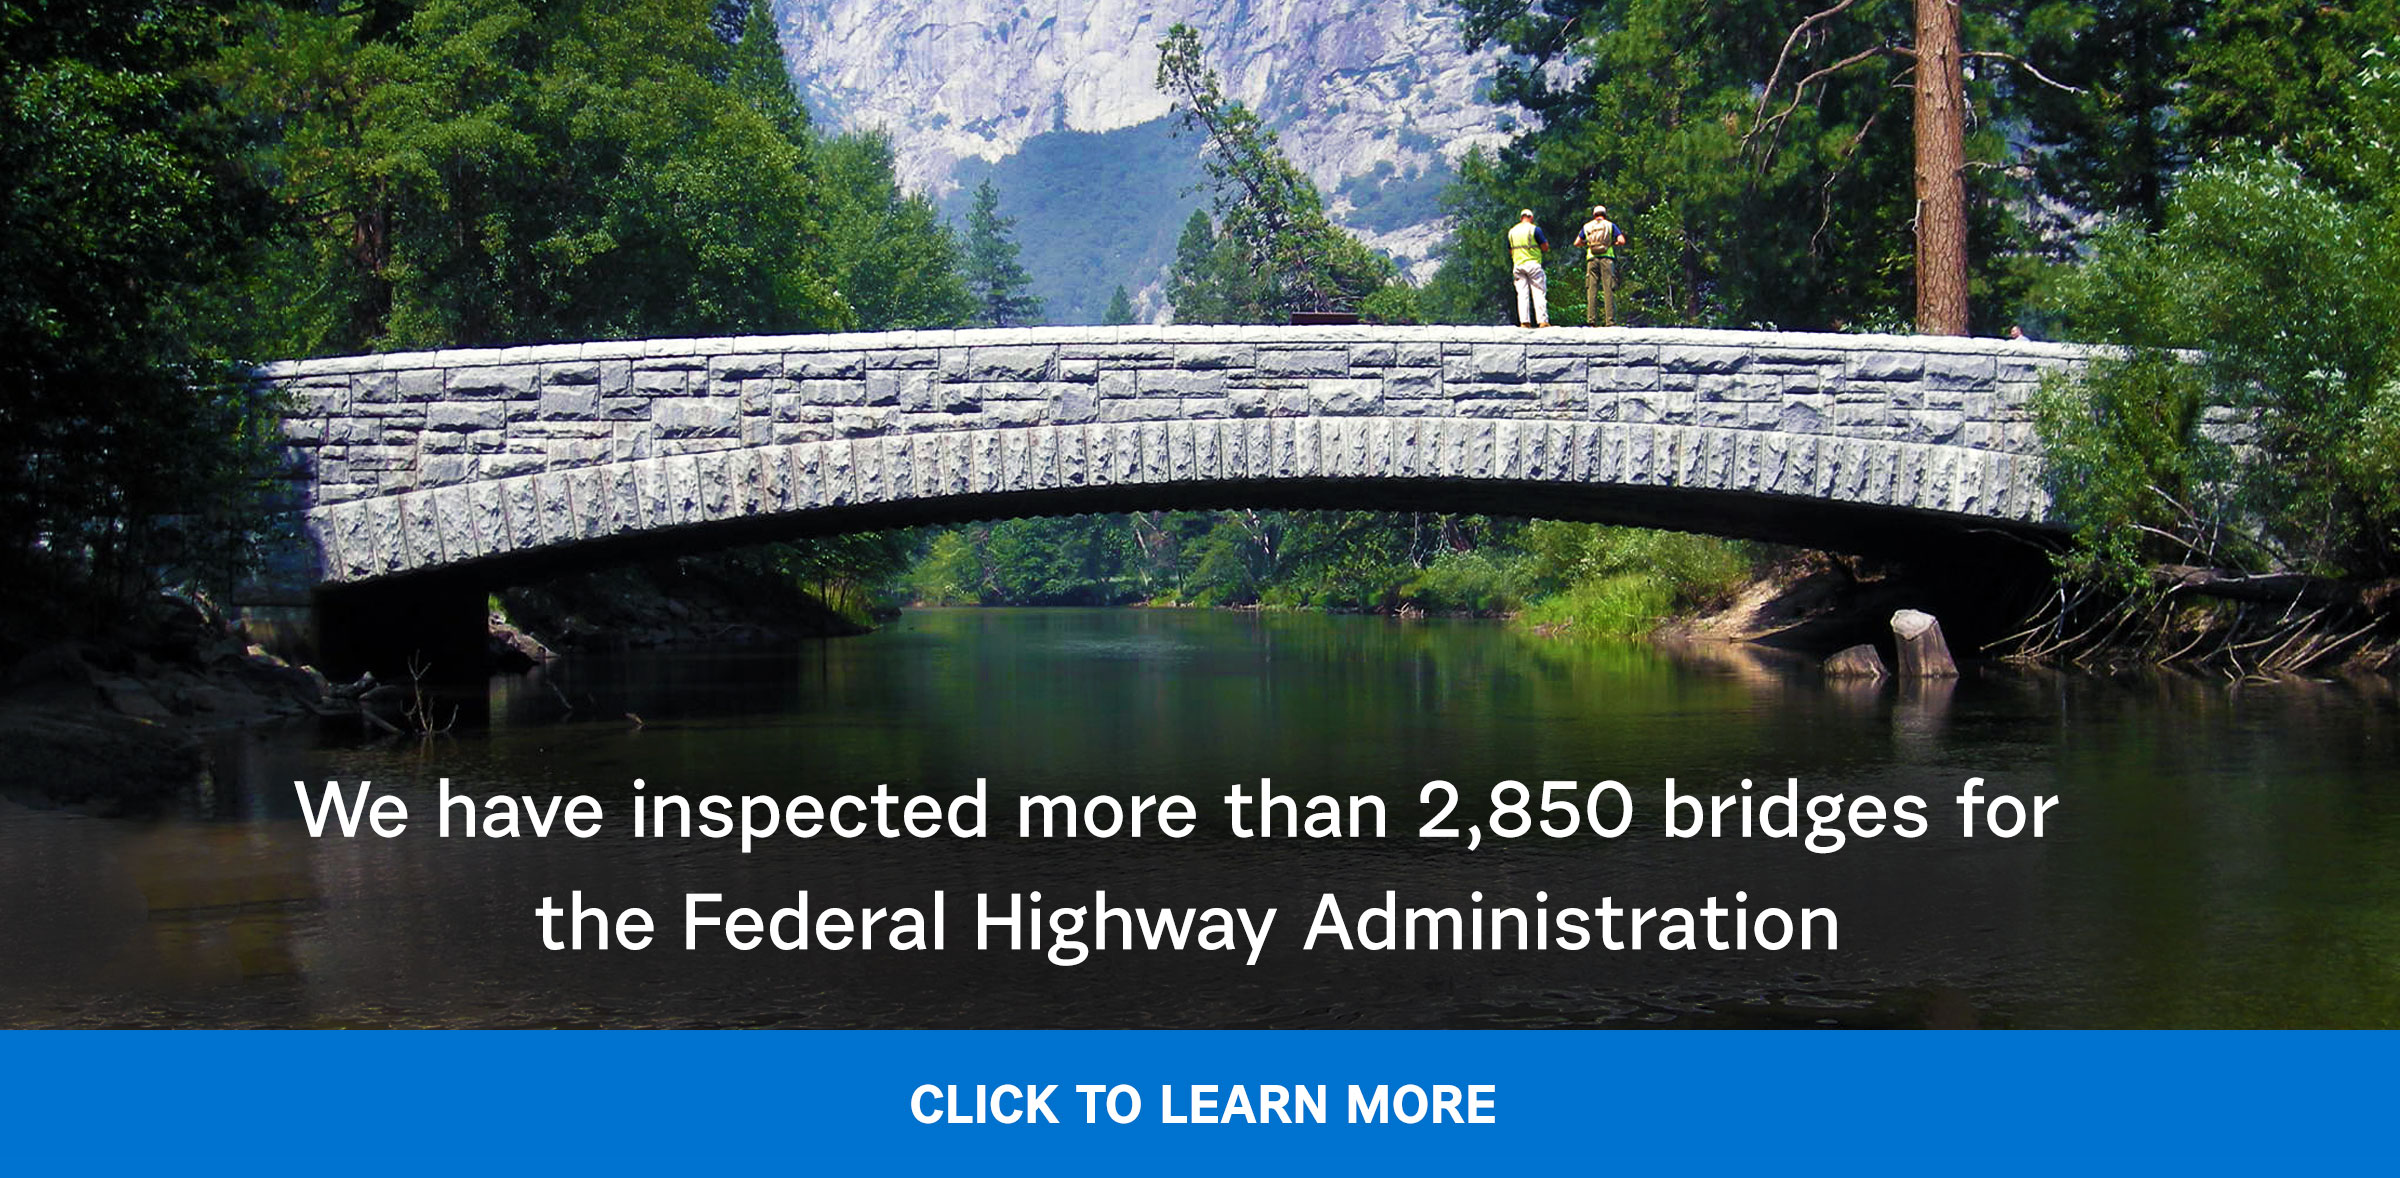 Clark Nexsen has inspected more than 2,800 bridges for the Federal Highway Administration